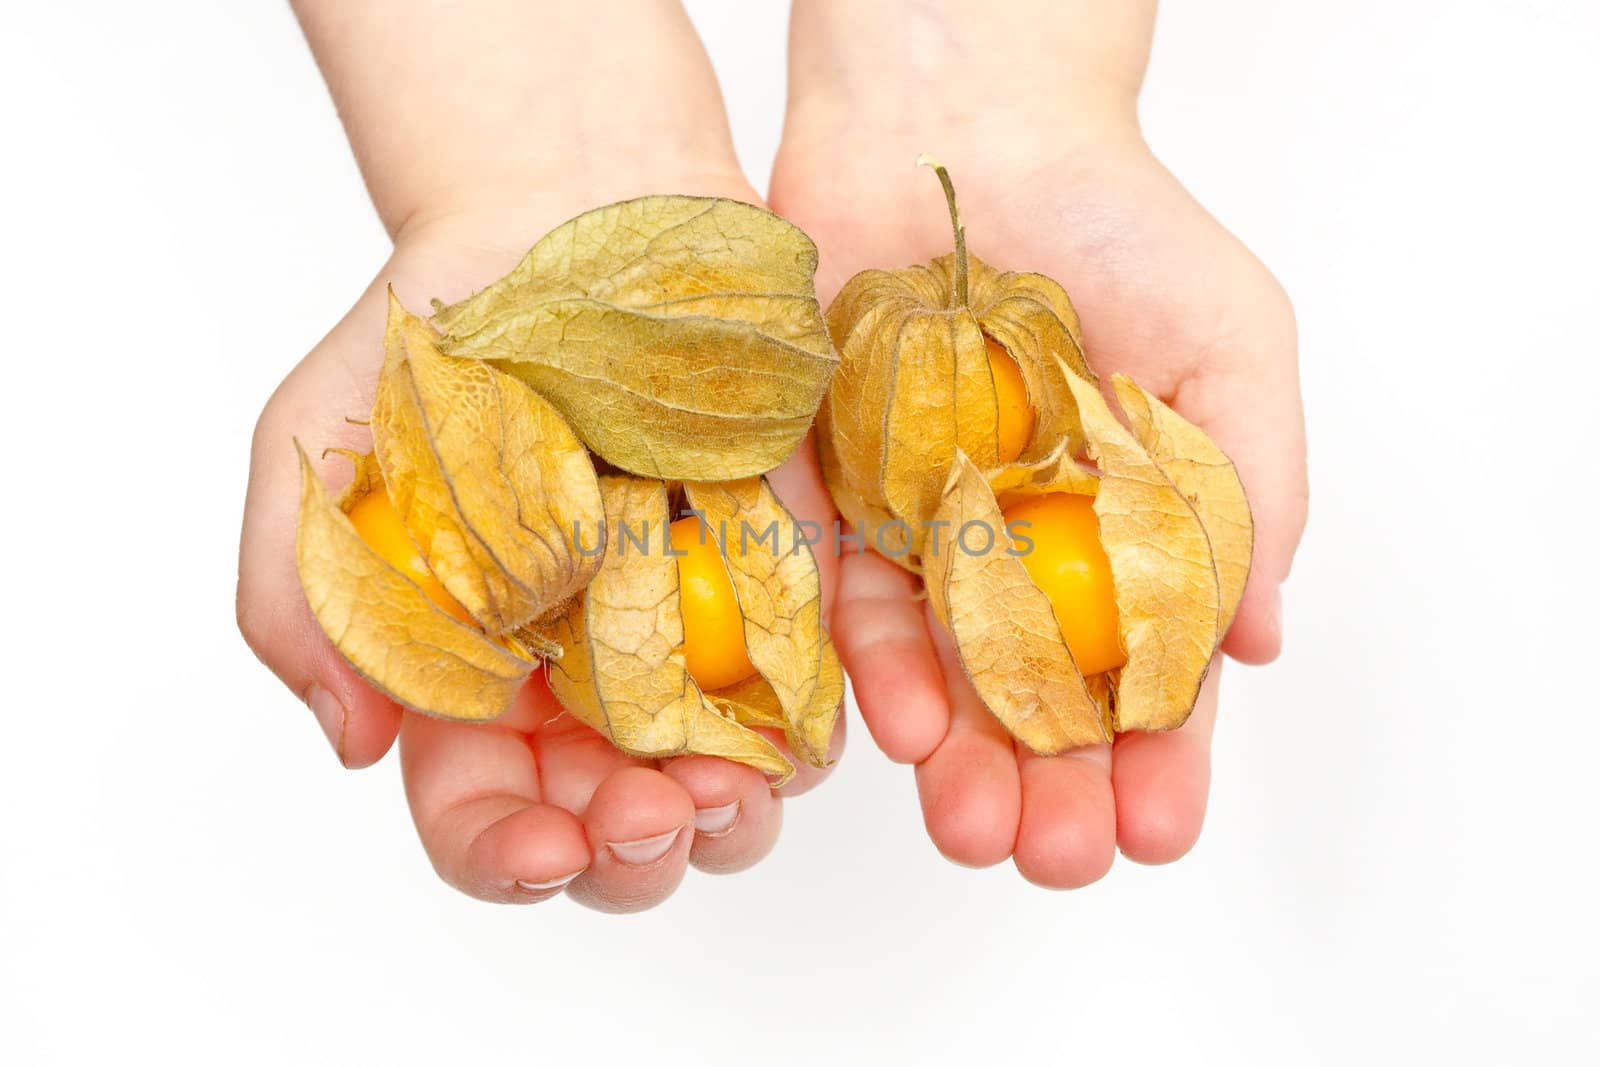 Child's hands holding physalis fruit on white background